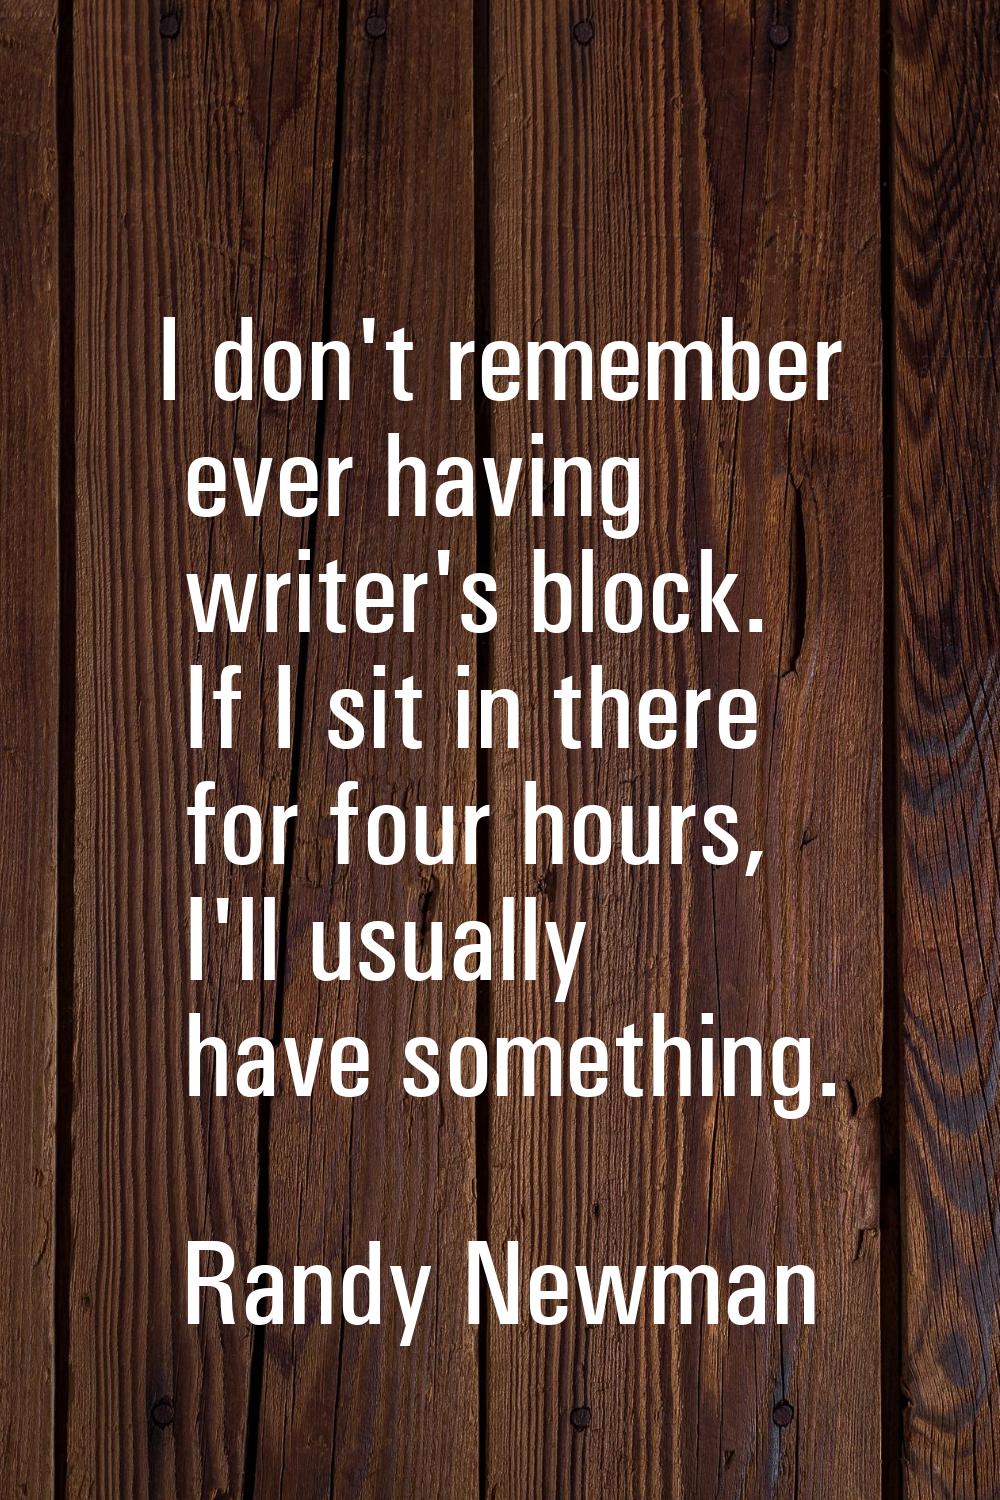 I don't remember ever having writer's block. If I sit in there for four hours, I'll usually have so